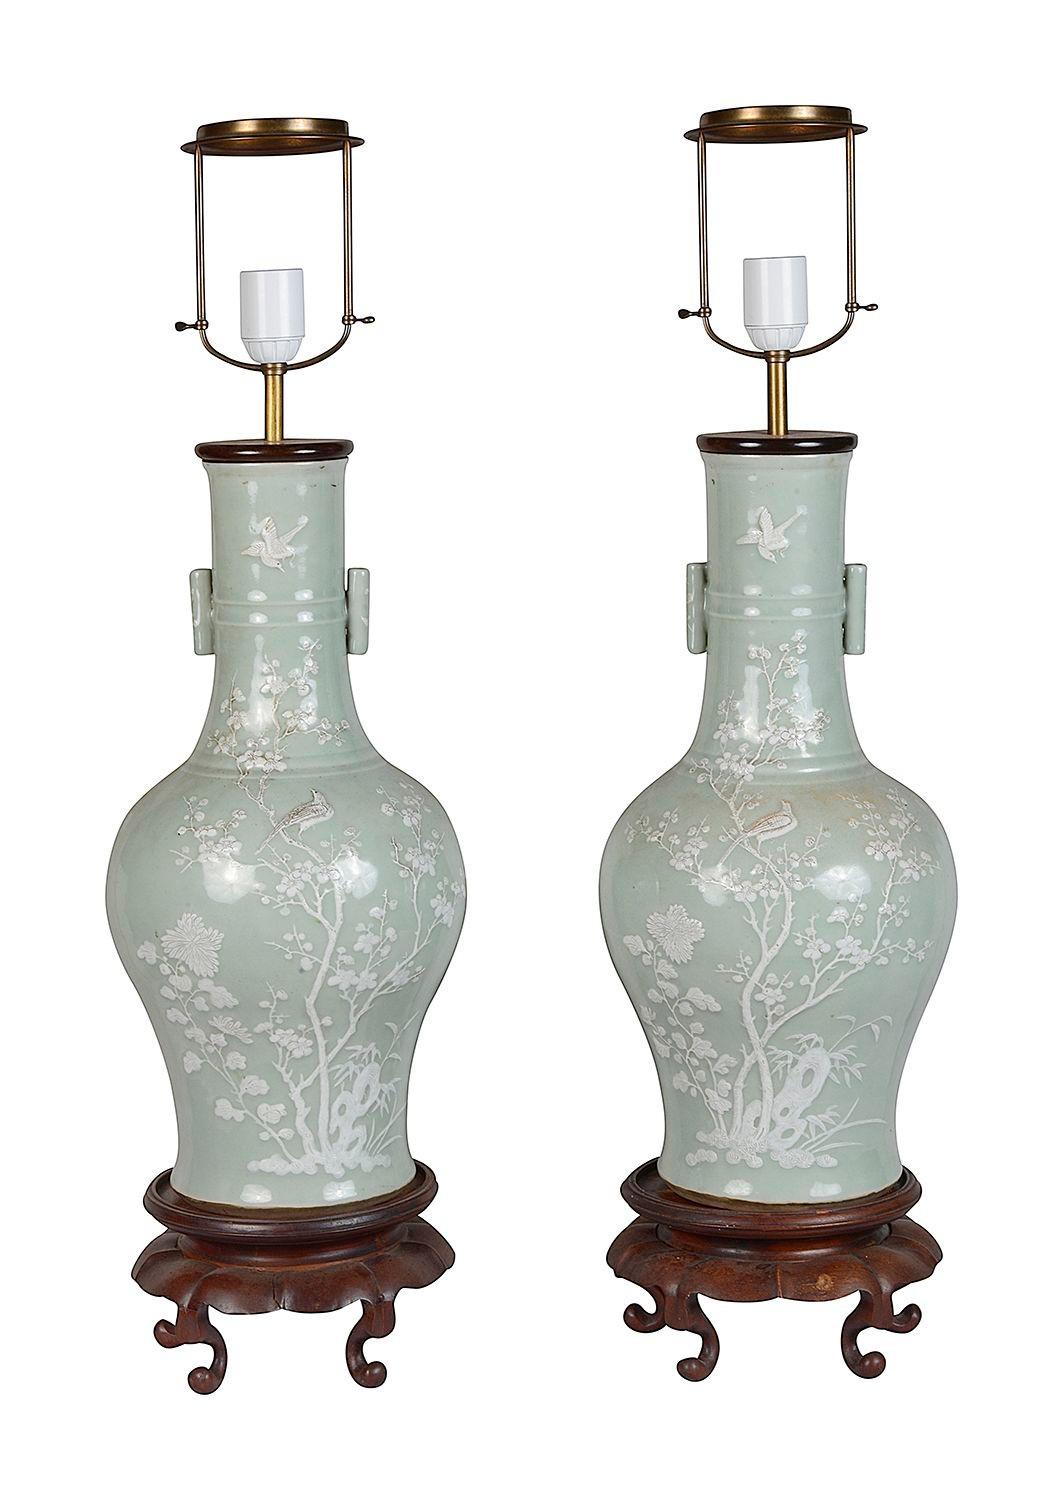 A very impressive and decorative pair of late 19th Century Chinese Celadon porcelain vases / lamps. Each with wonderful raised floral and folate decoration with birds perched on the branches. Raised on classical carved hardwood stands.


Batch 76 N/H